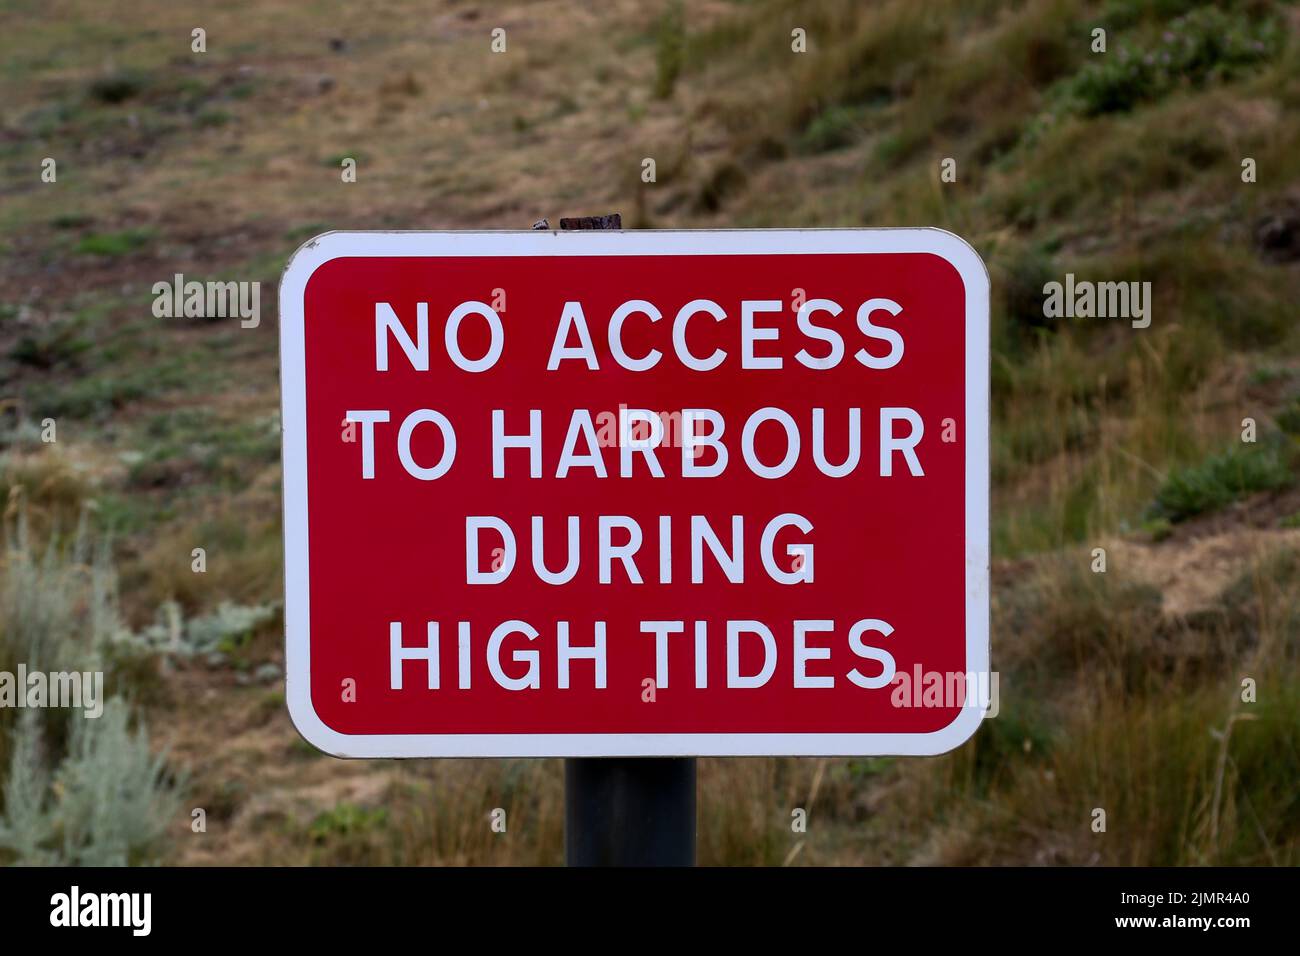 No access to harbour signboard situated at a coastal harbour location Stock Photo